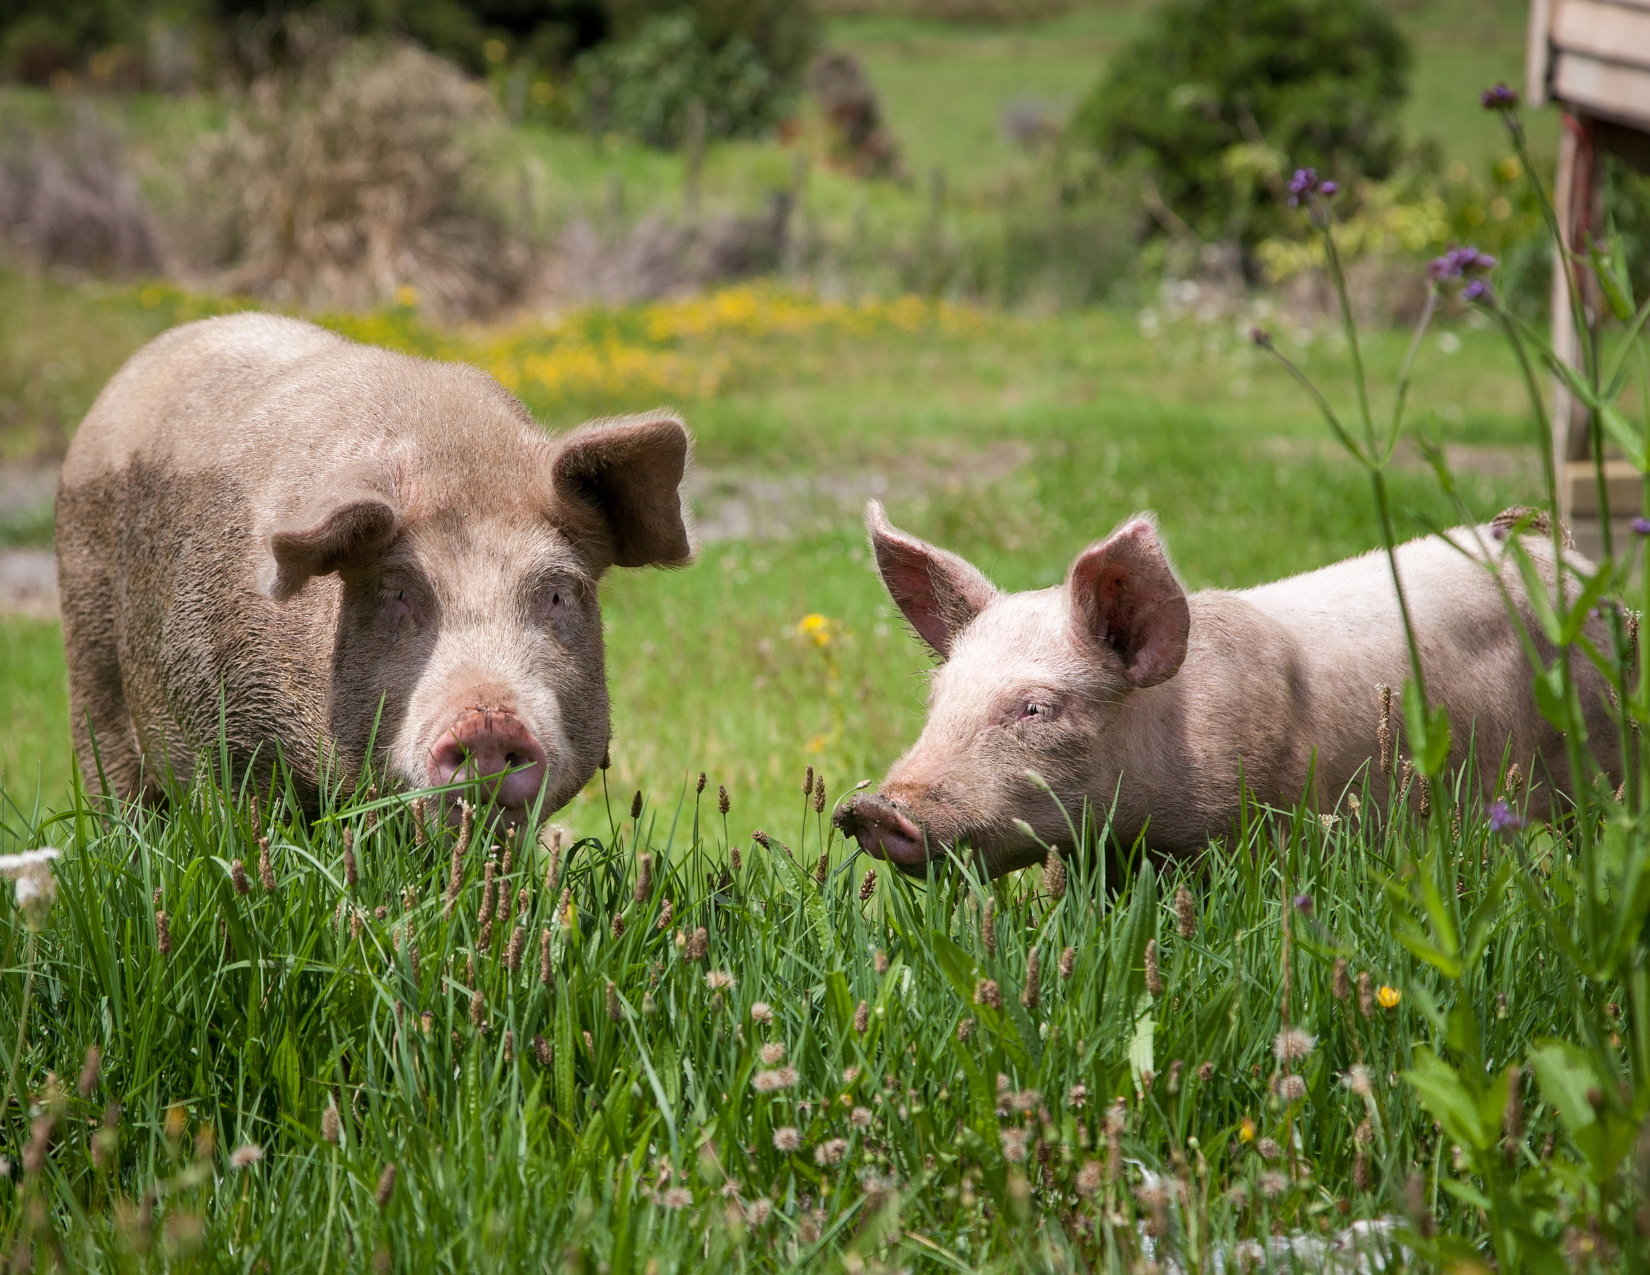 Two pigs are standing and laying in the grass